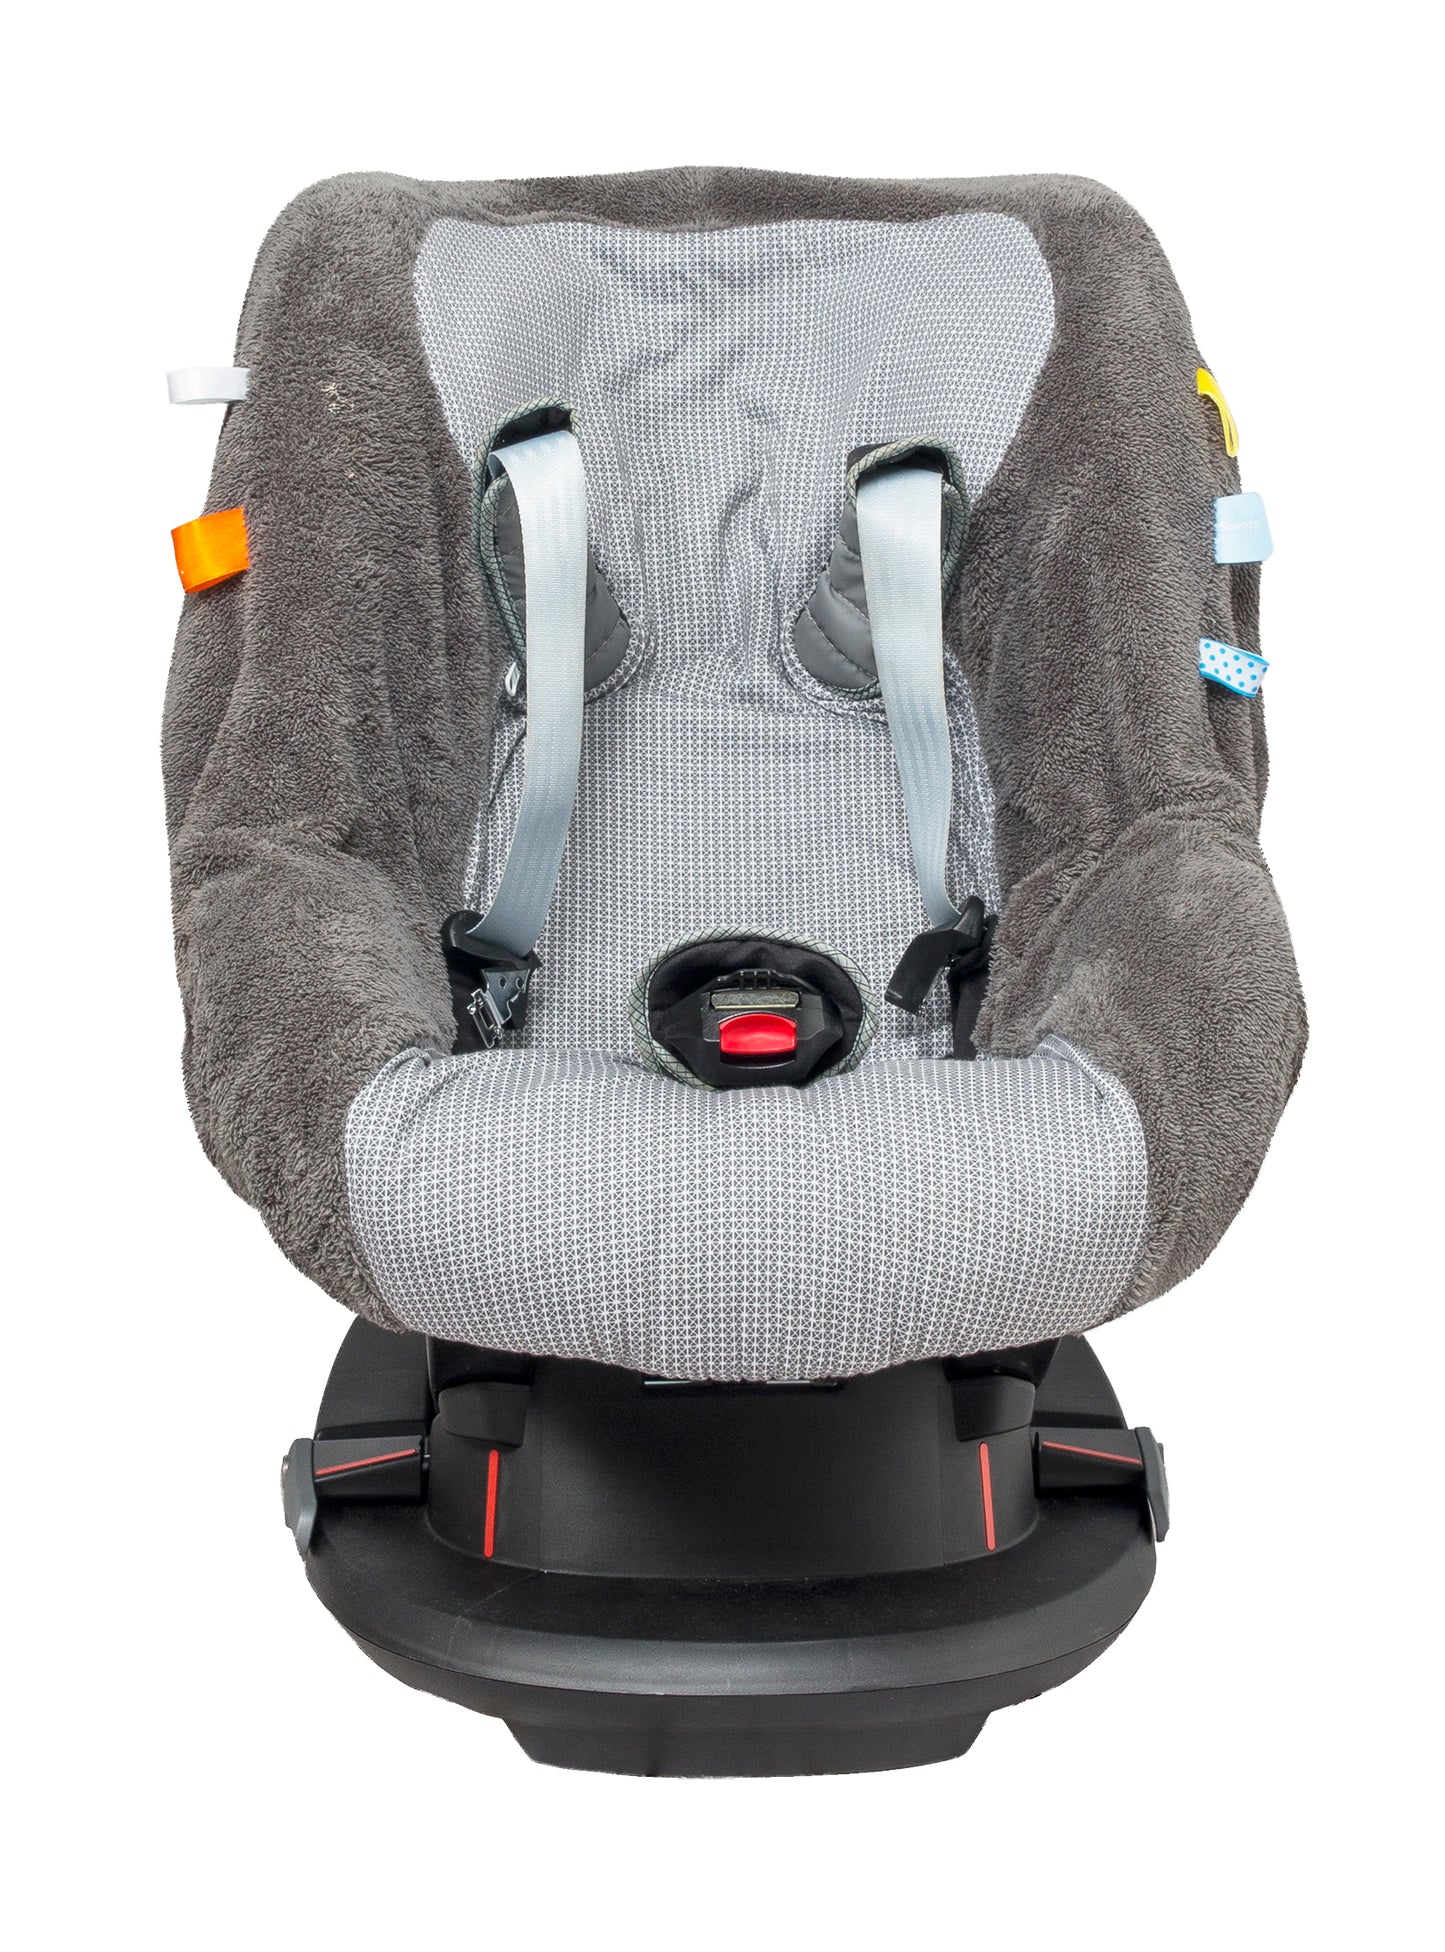 Snoozebaby - Carseat Cover - Storm Grey